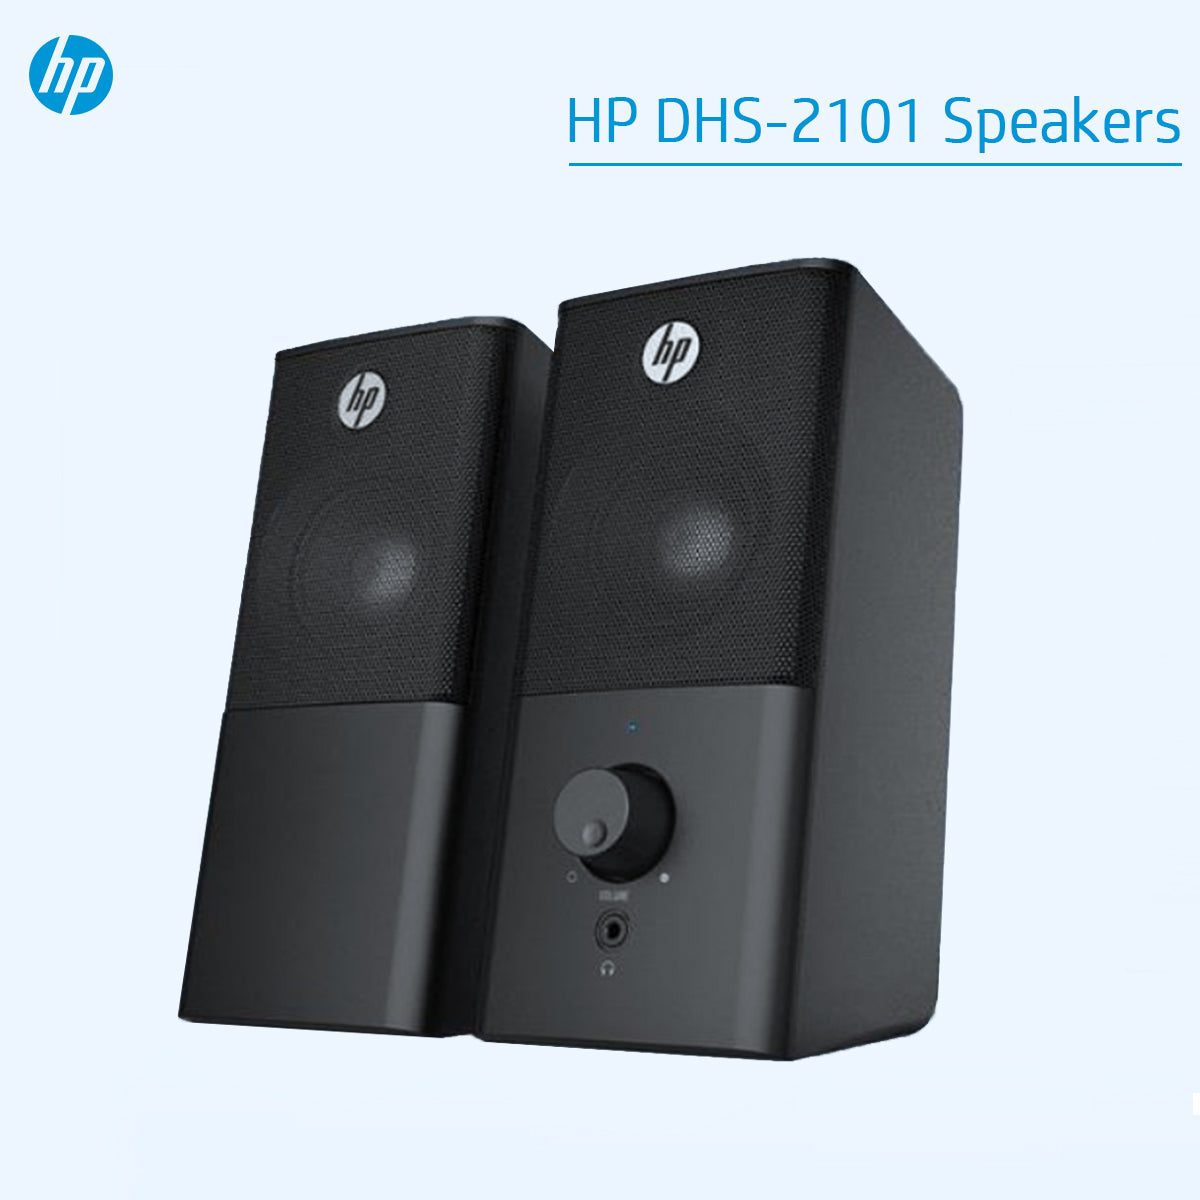 HP DHS-2101 2.0 Portable Multimedia Wired Black Speaker with USB and 3.5mm AUX Connectivity